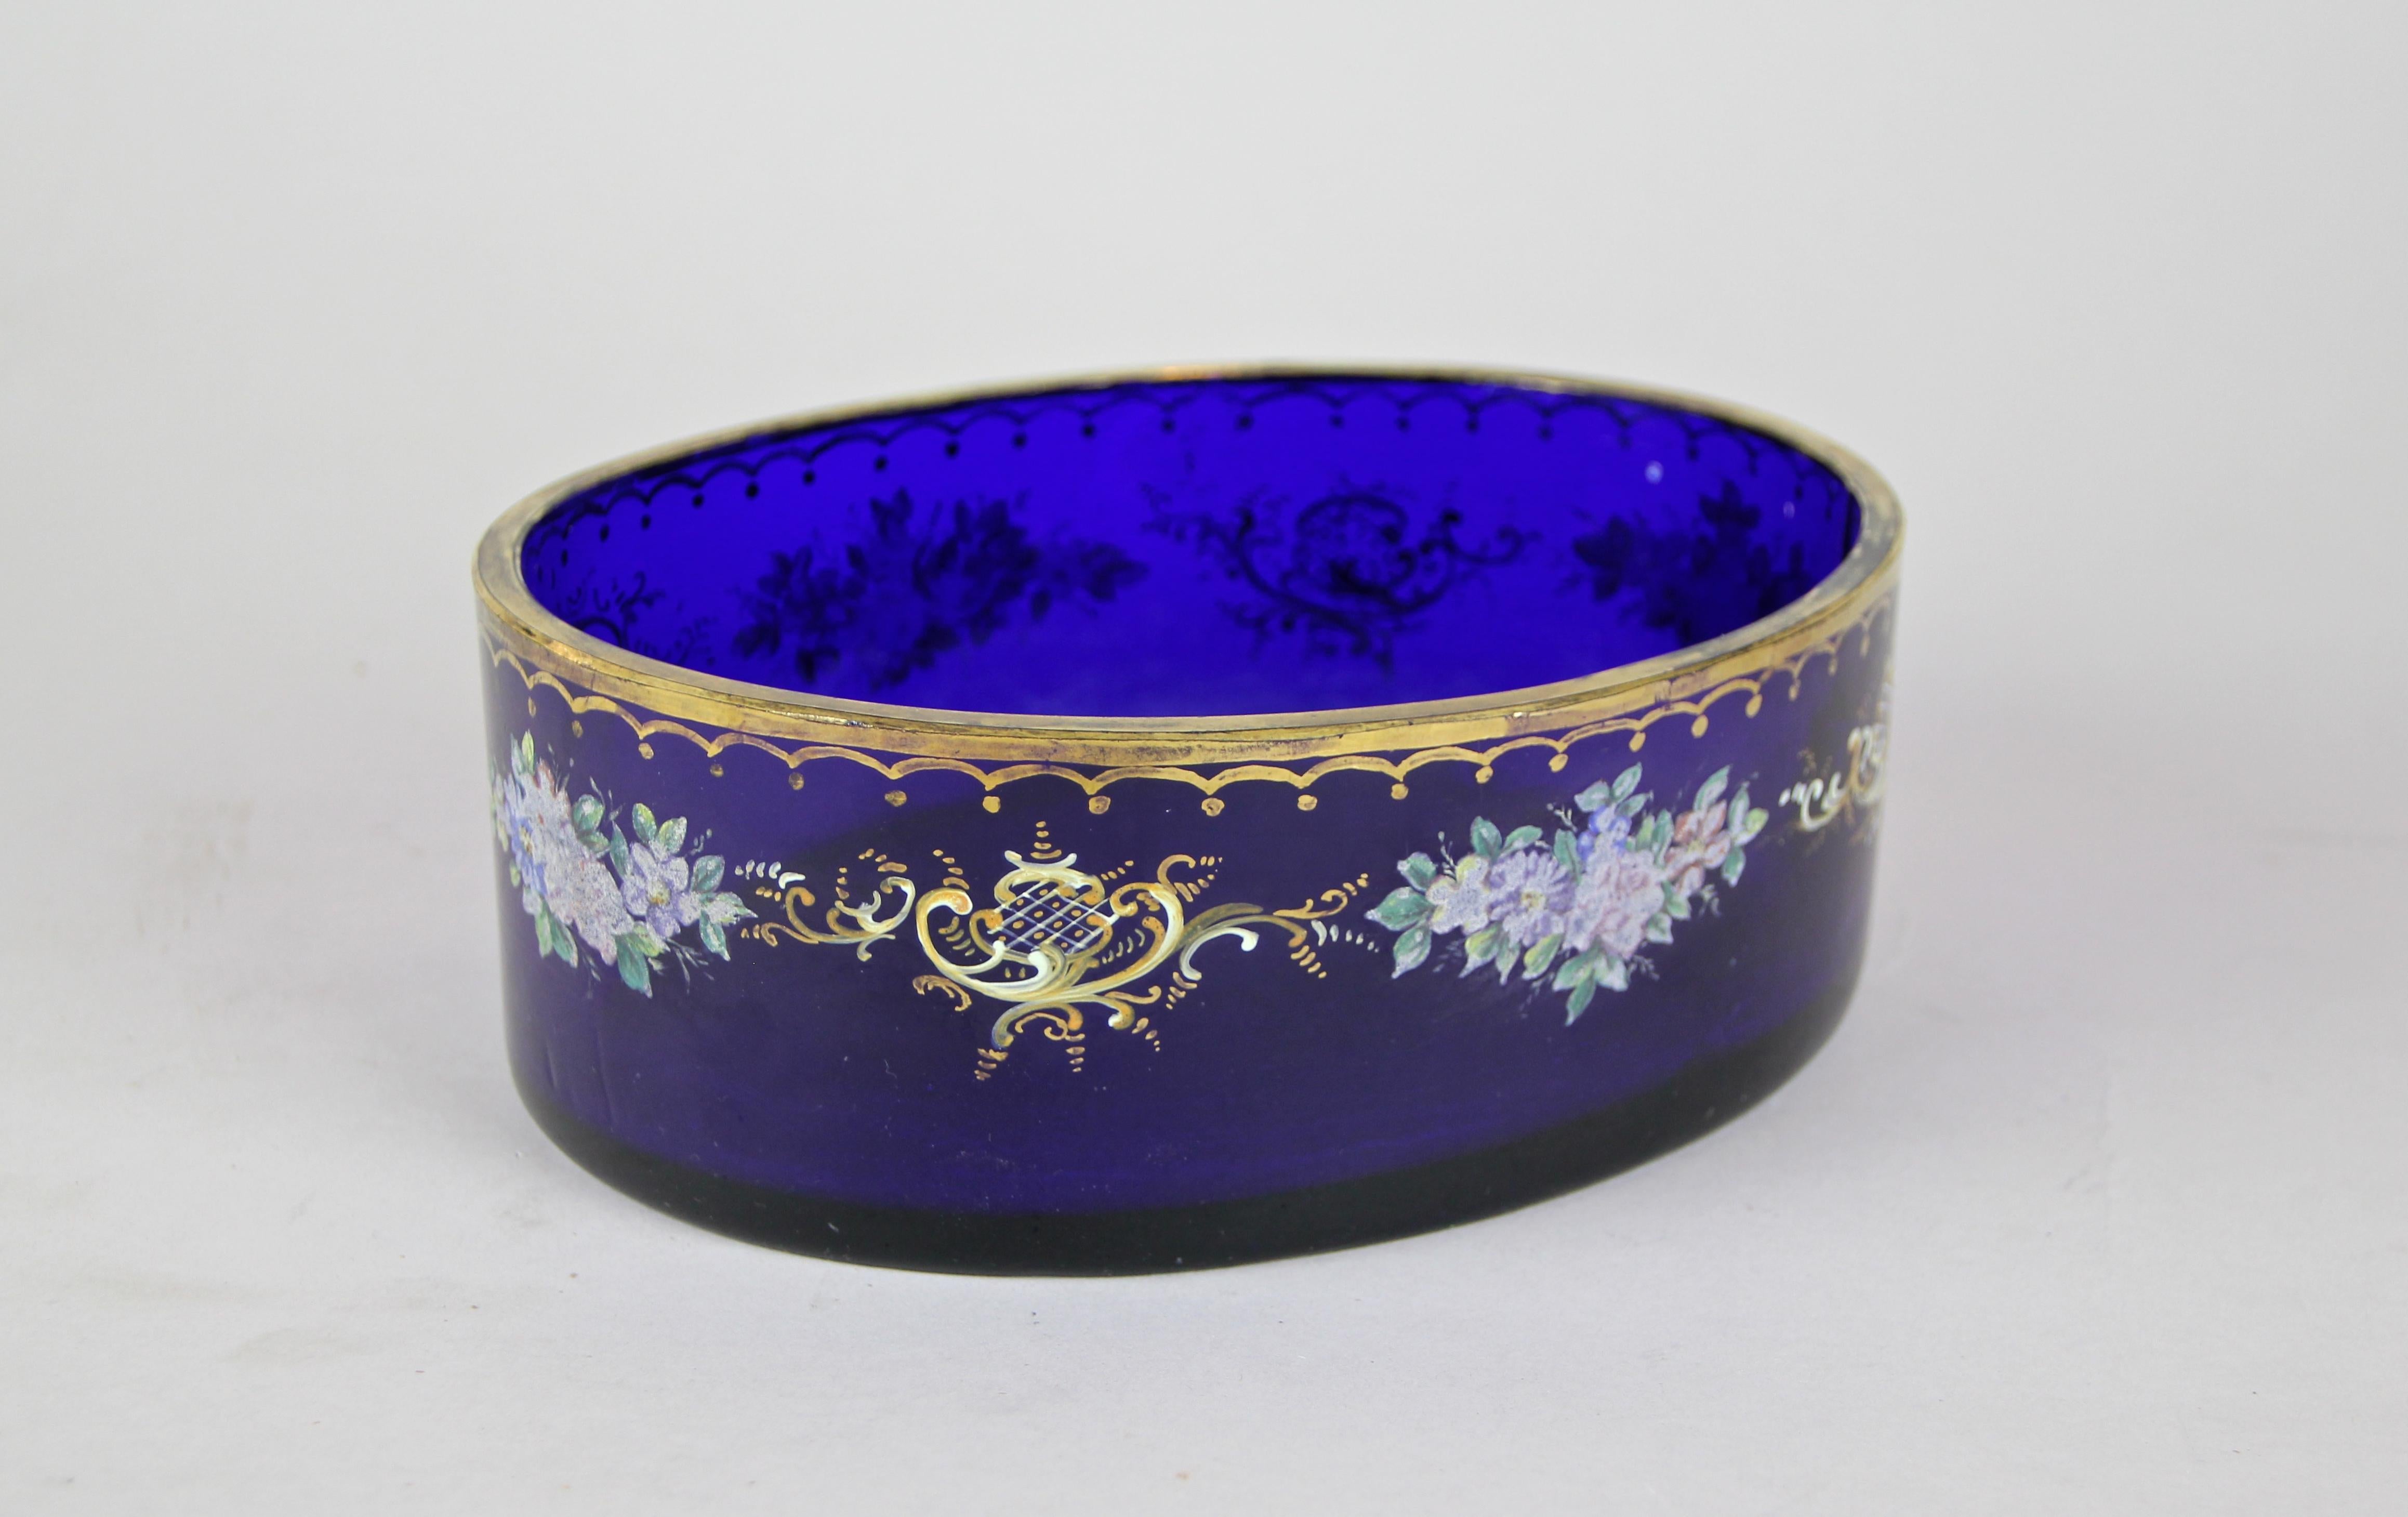 Enchanting dark-blue glass bowl from the famous Austrian Biedermeier era, circa 1840. The oval shaped glass bowl is adorned by elaborately hand painted flowers and other artfully designed elements. The golden upper edge builds a nice contrast to the